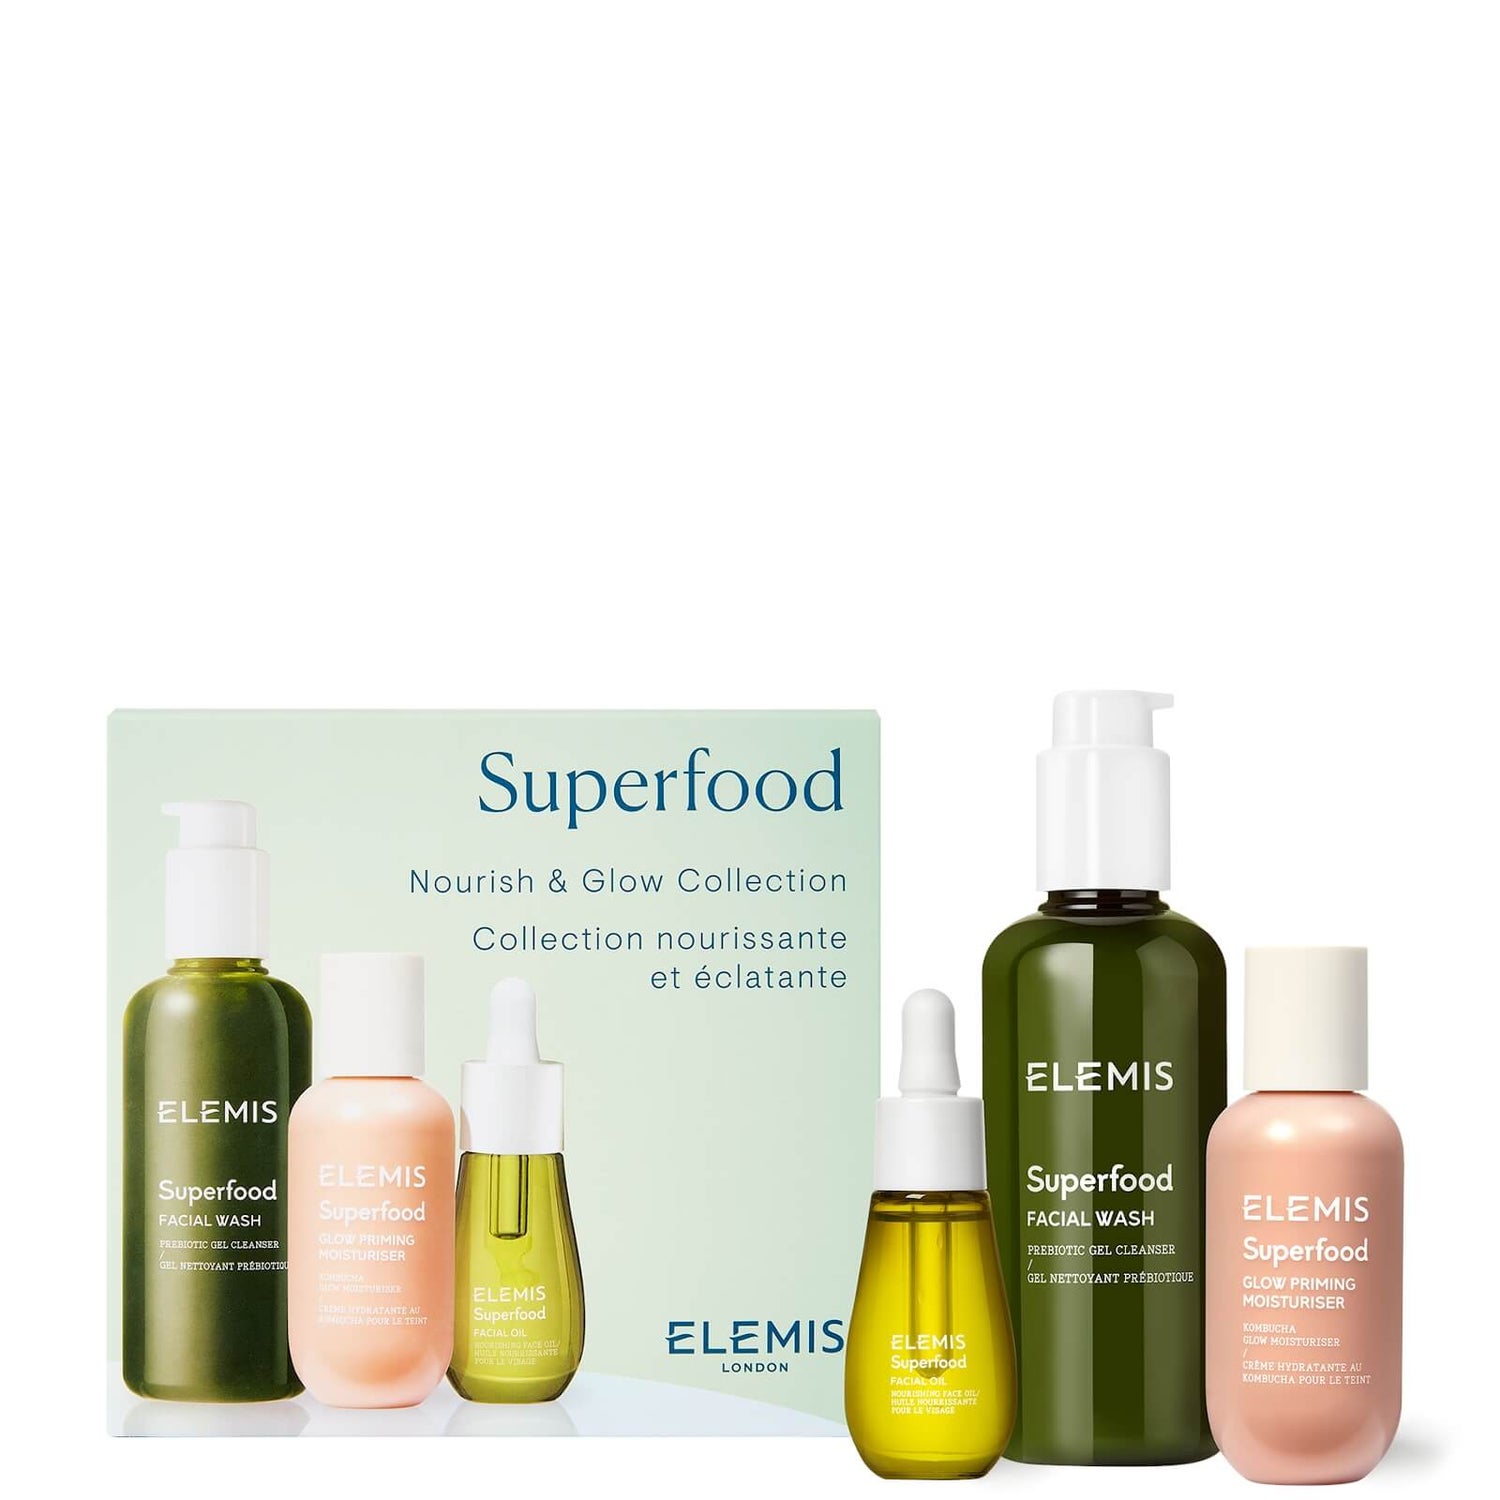 Superfood Nourish and Glow Collection